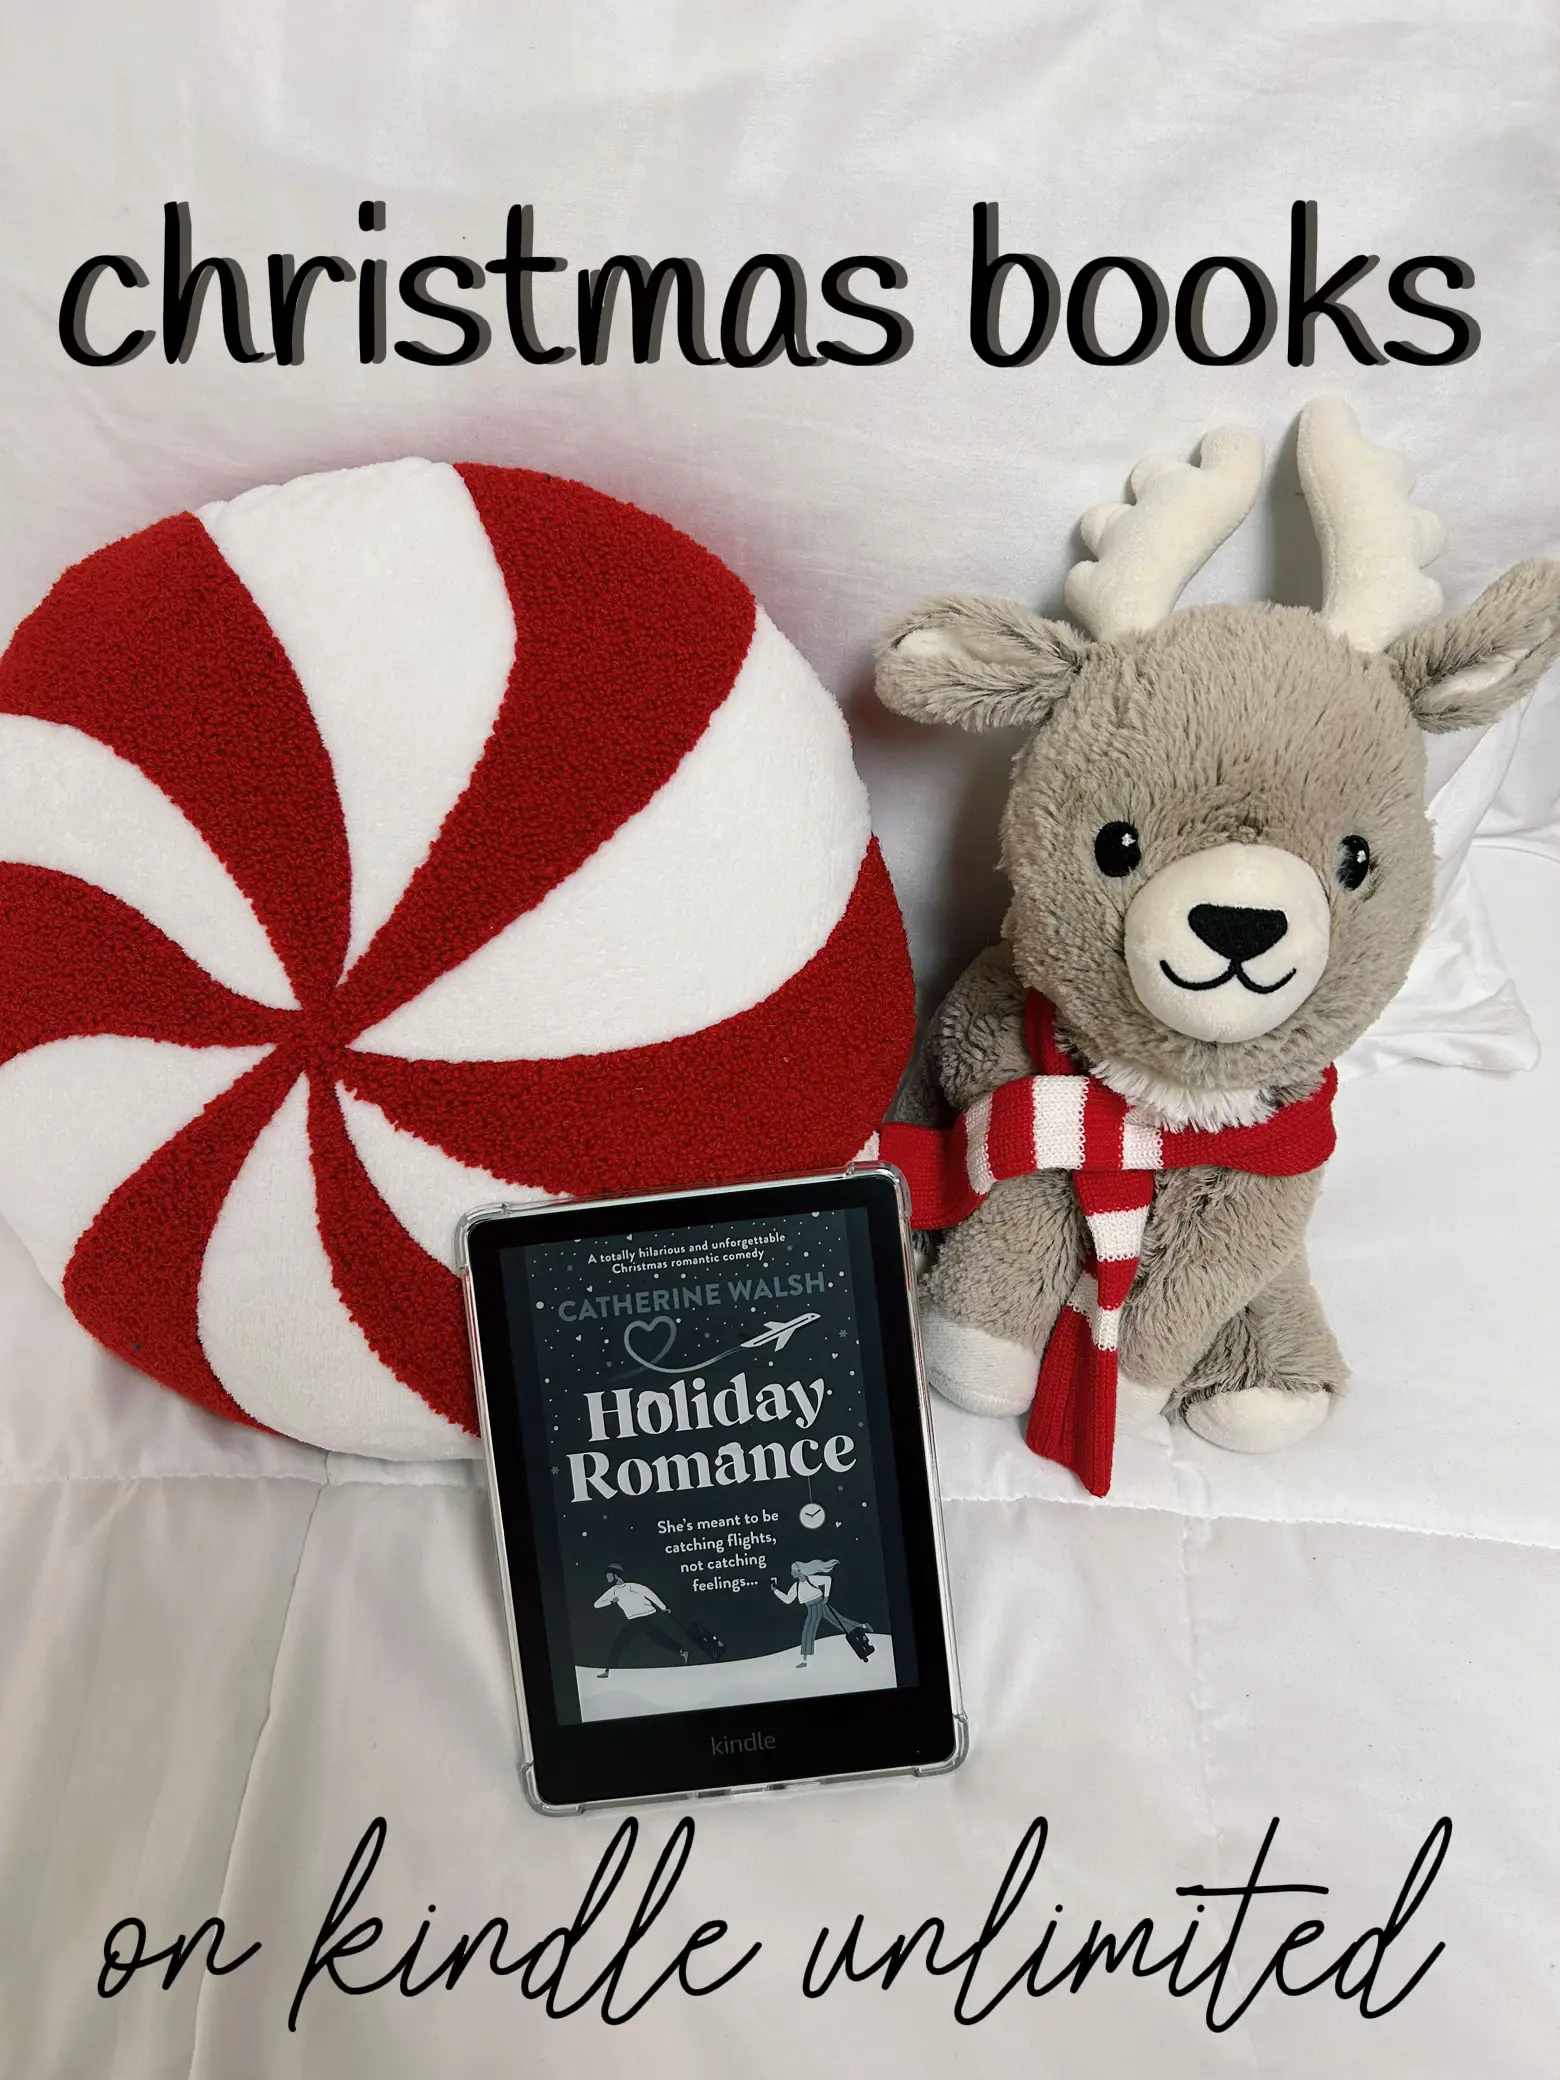 FREE Christmas/holiday books on kindle unlimited!